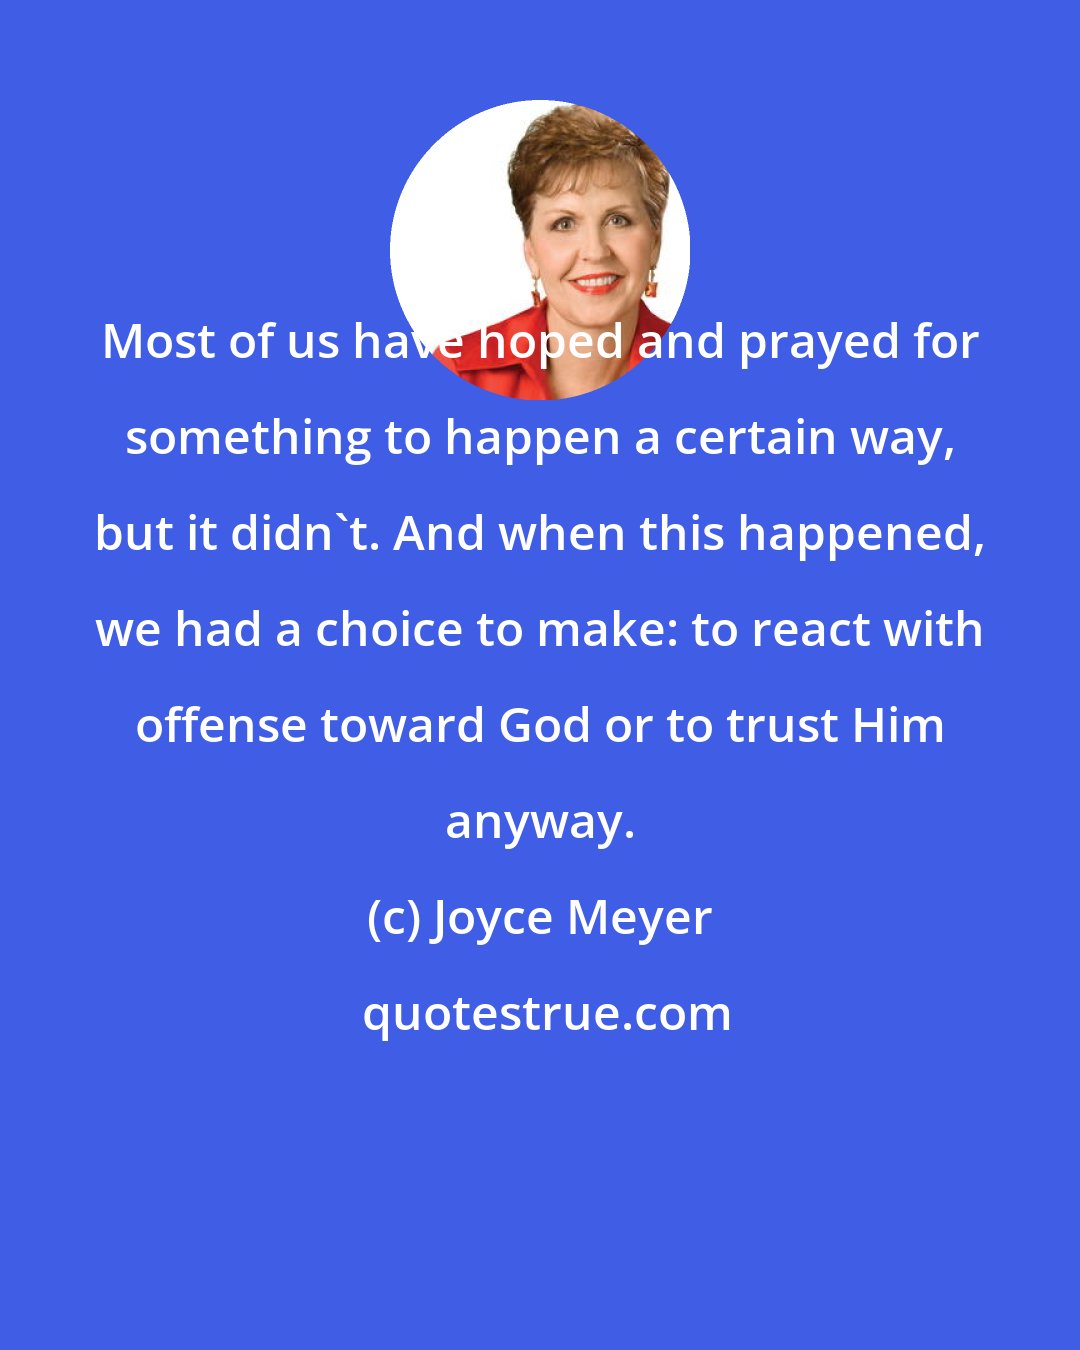 Joyce Meyer: Most of us have hoped and prayed for something to happen a certain way, but it didn't. And when this happened, we had a choice to make: to react with offense toward God or to trust Him anyway.